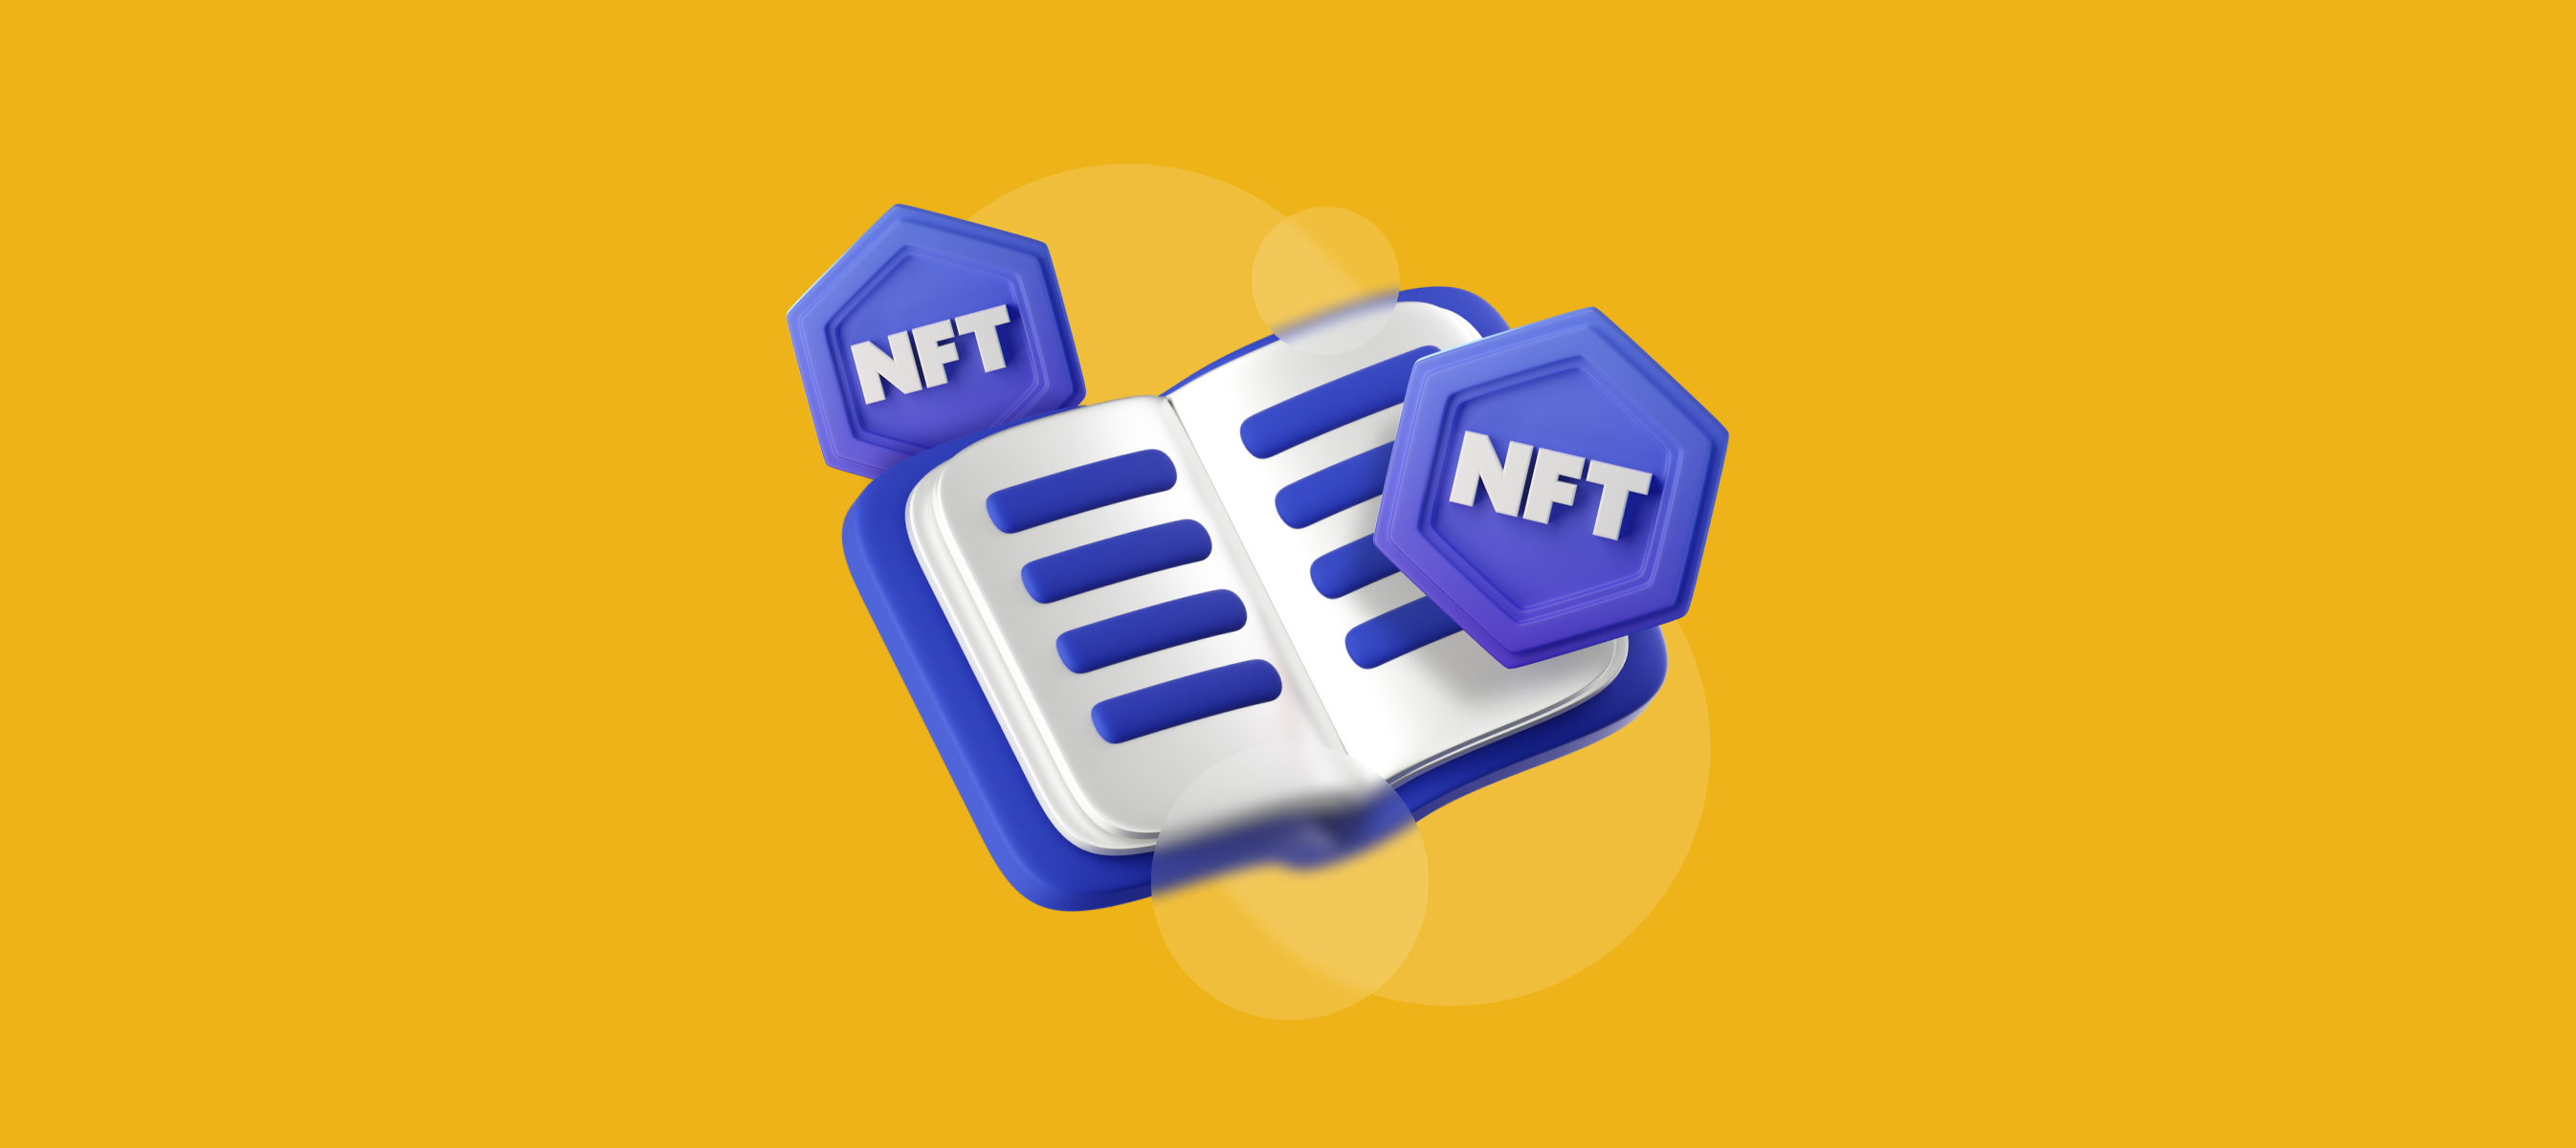 NFT and Publishing Industry: From Books to Articles